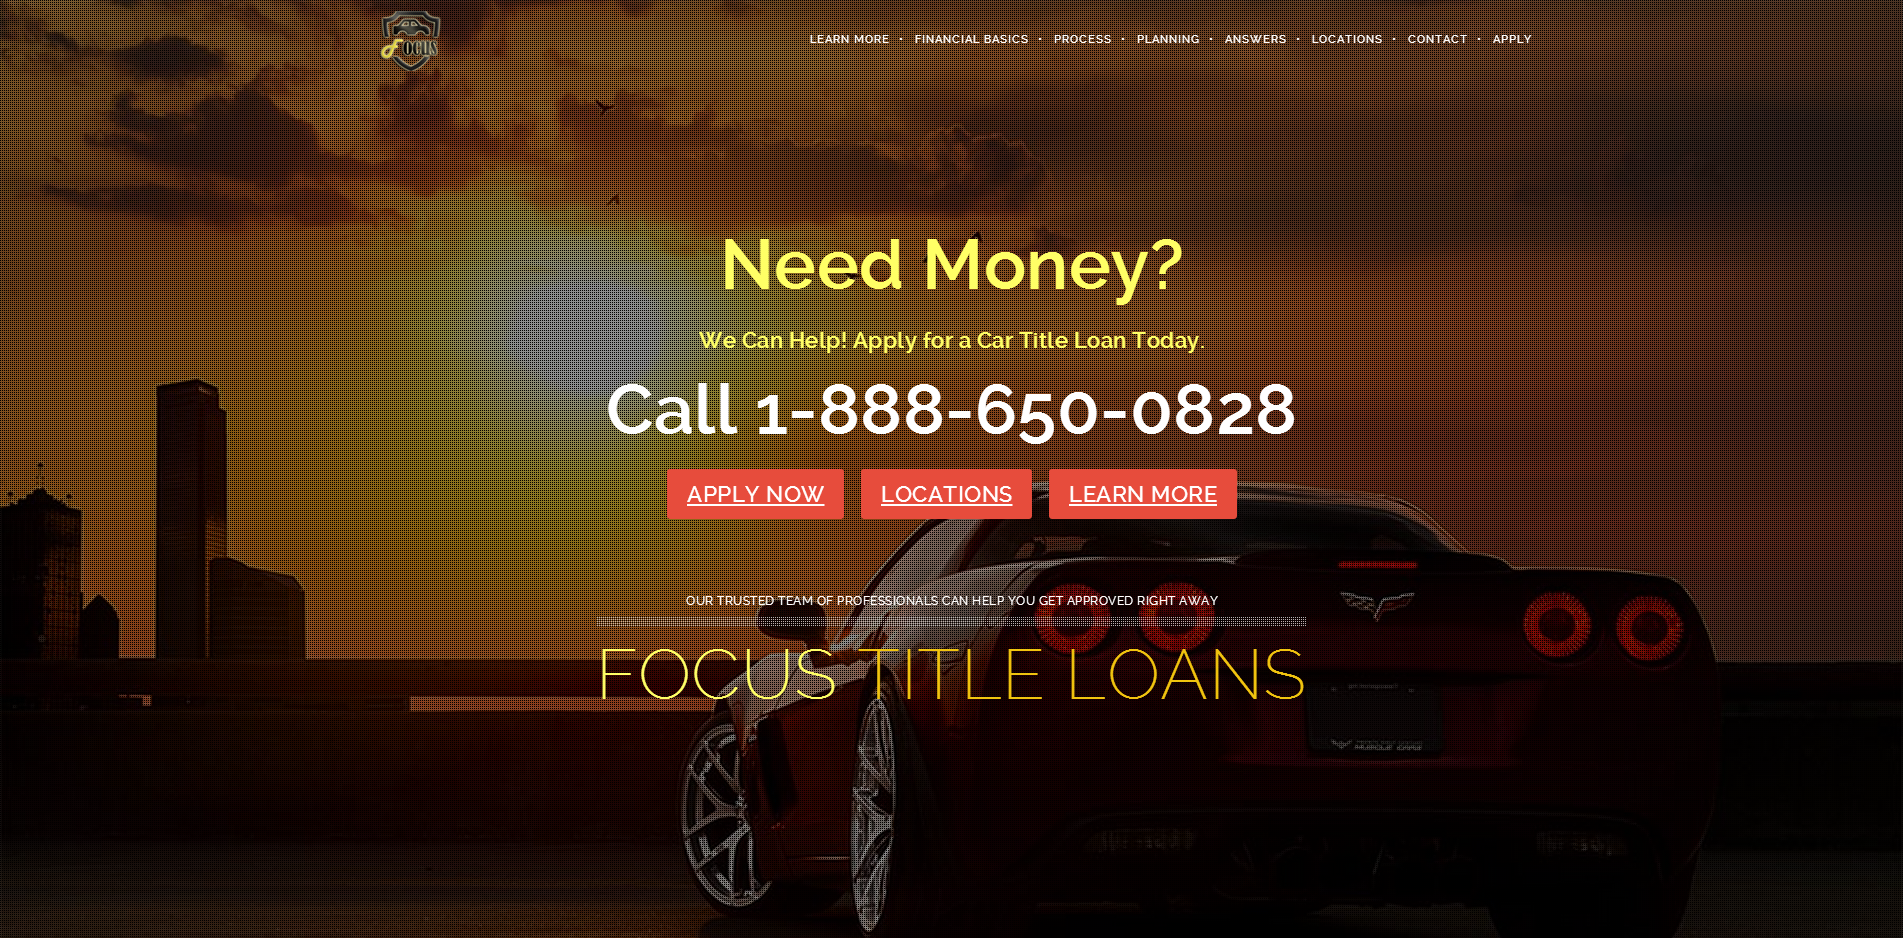 Car Title Loans Focused on Support & Education